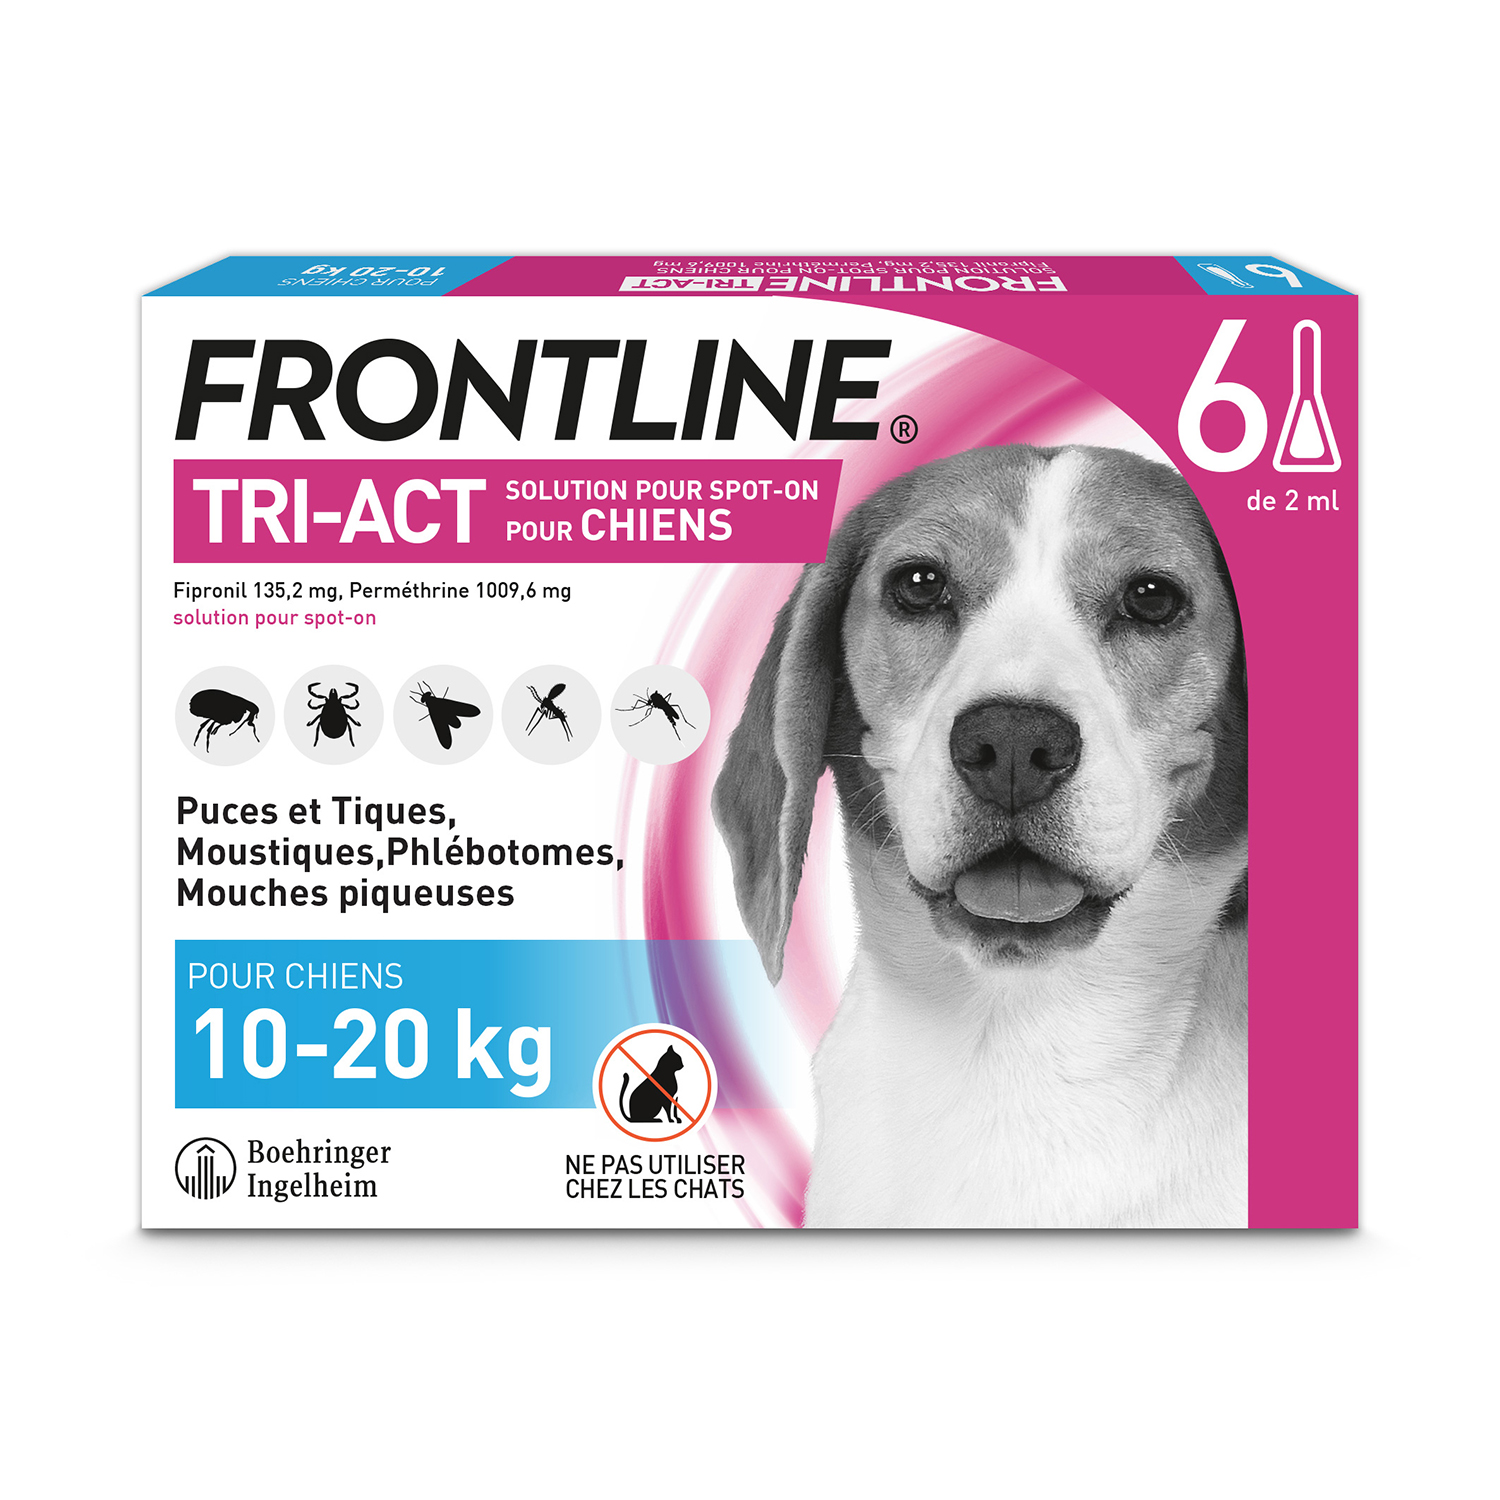 Frontline-TriAct-Chien-Taille M-6pipettes-MAIN-FR-2020.jpg